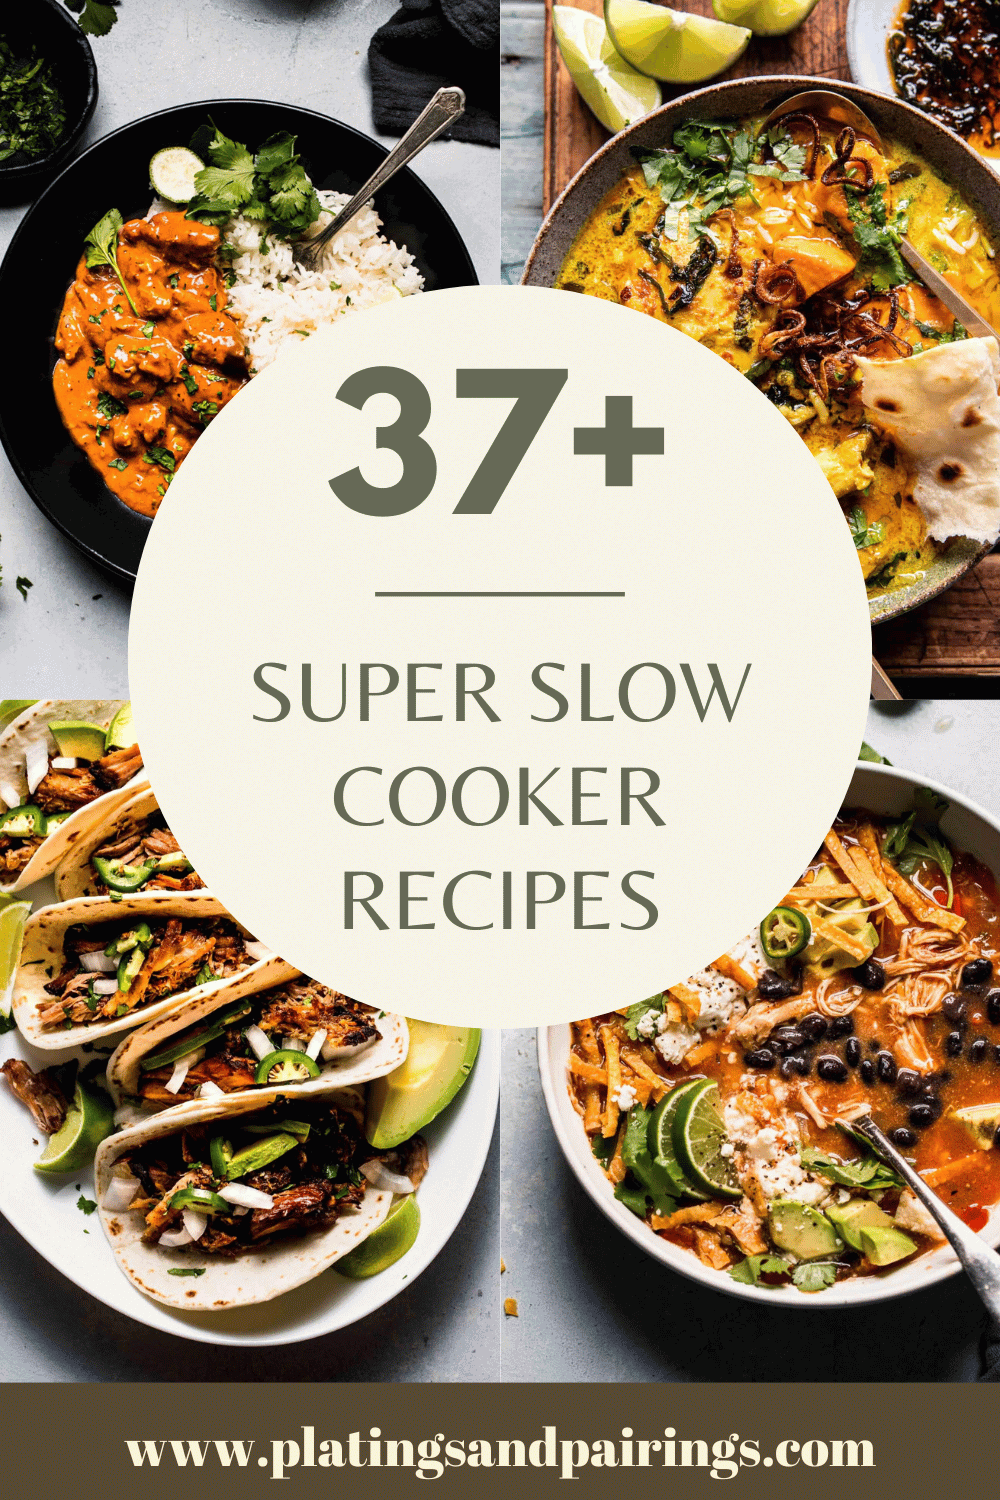 37+ BEST Slow Cooker Recipes (Easy + Delicious!)